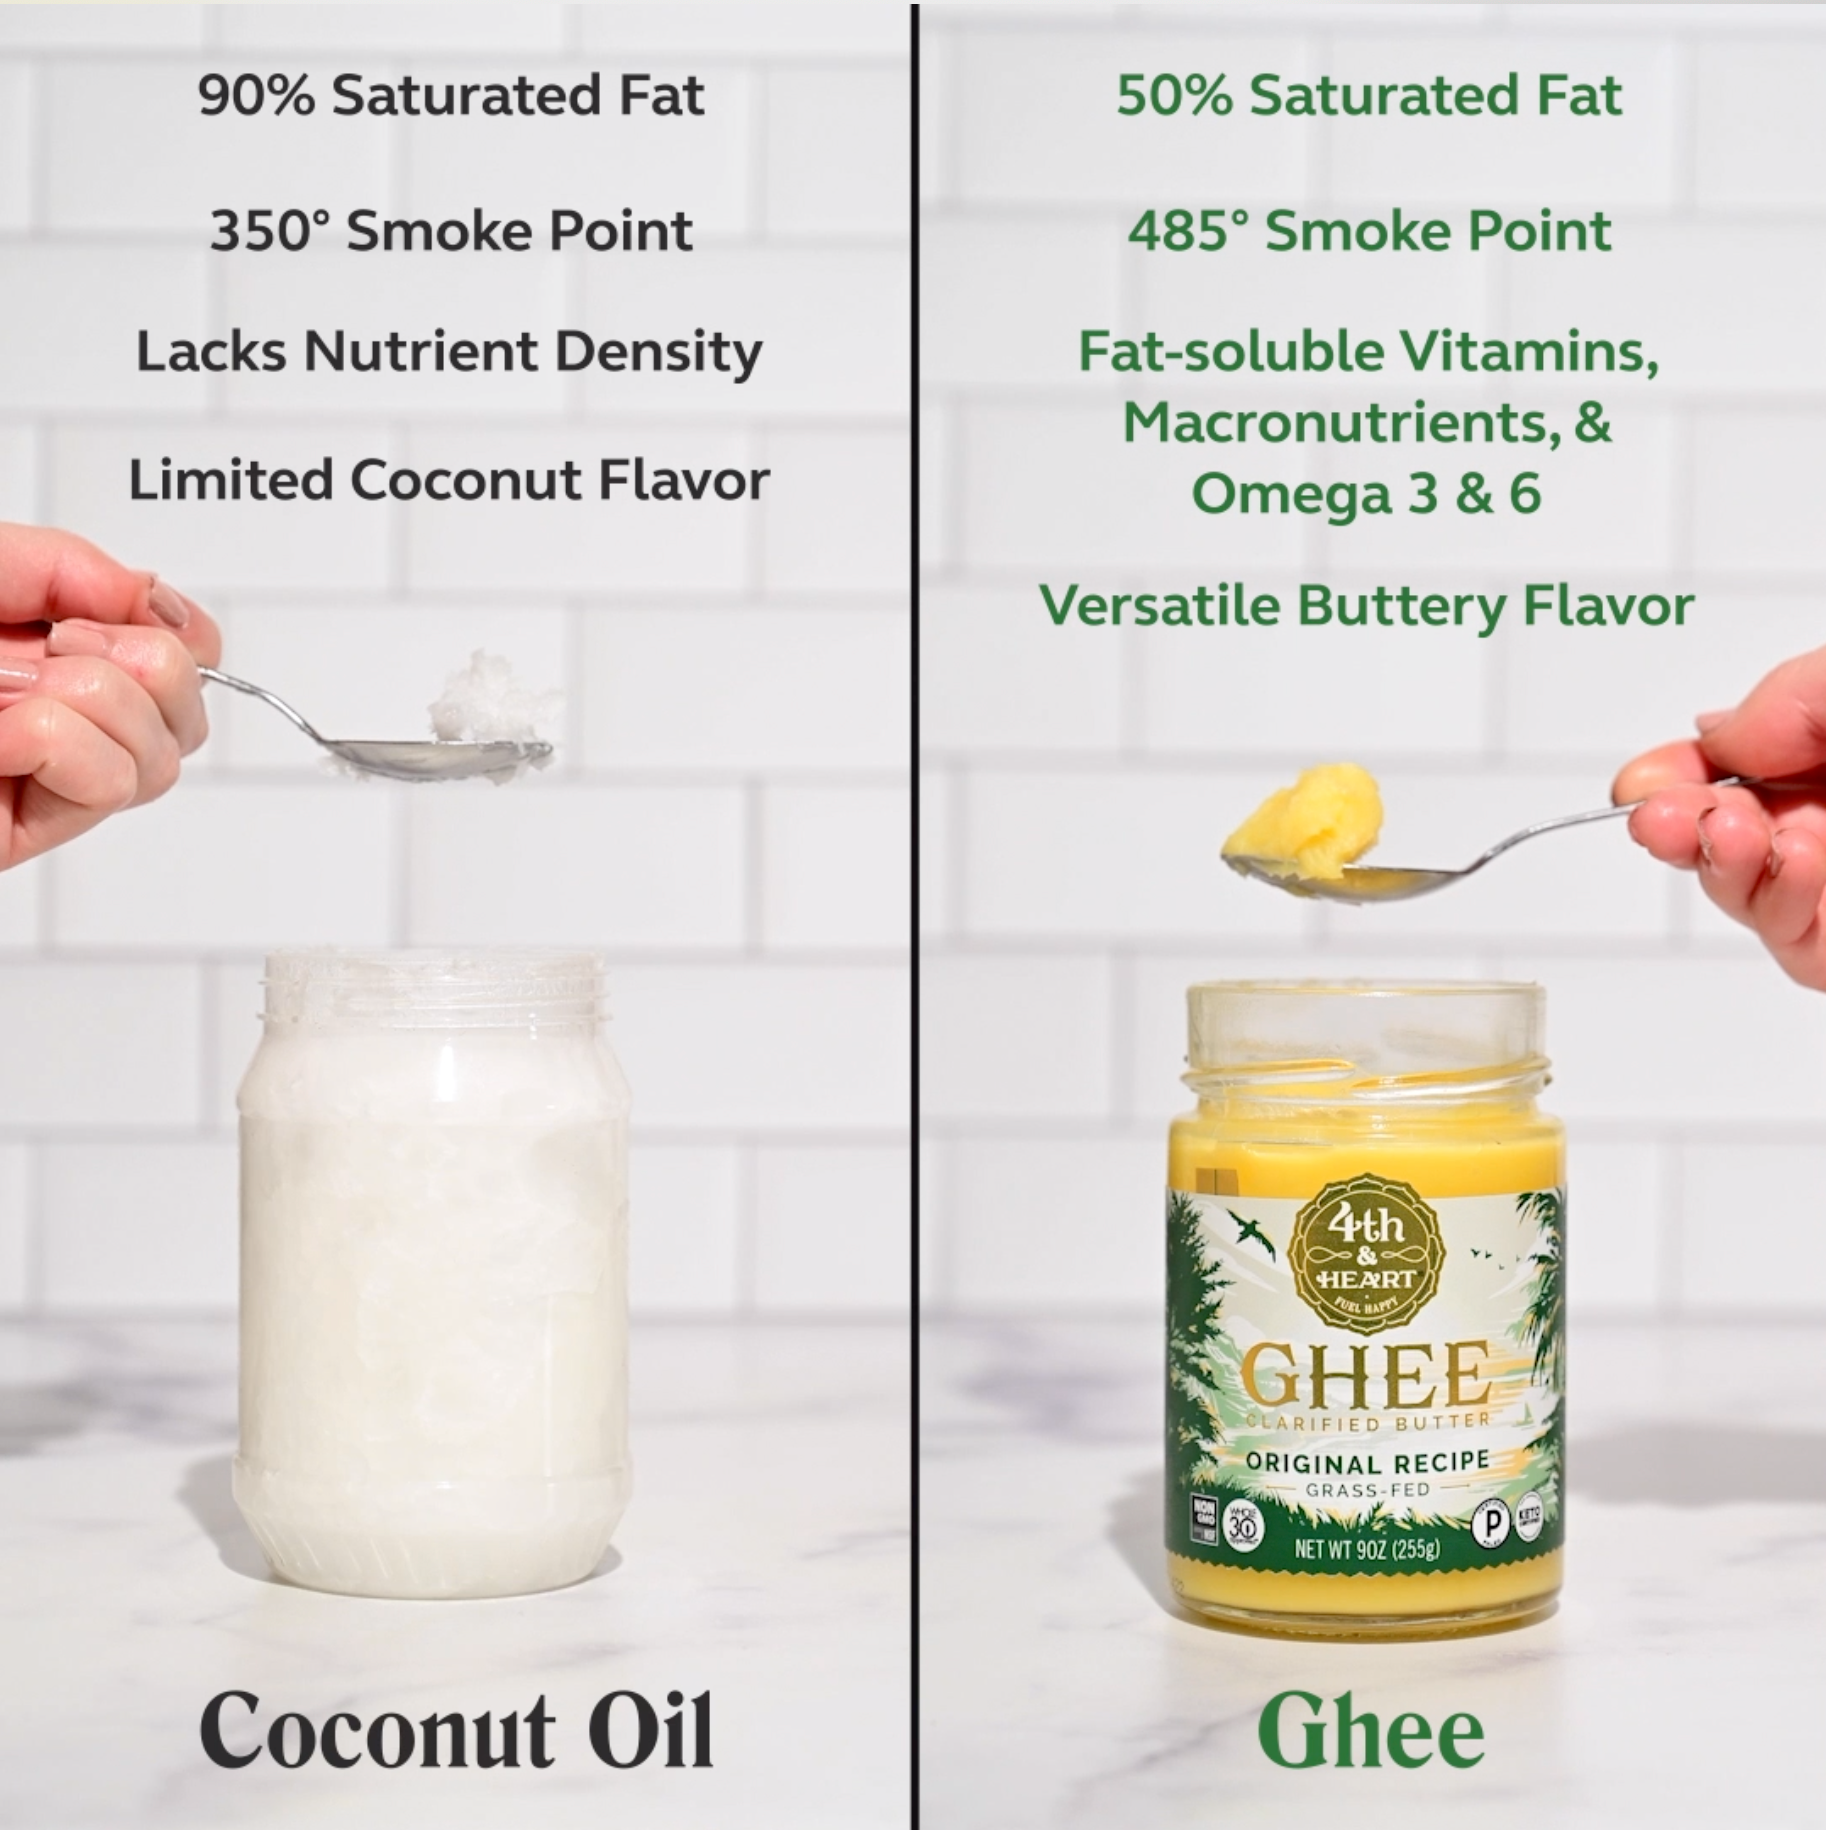 Ghee vs. Coconut Oil – 5 Reasons to Switch to Ghee!